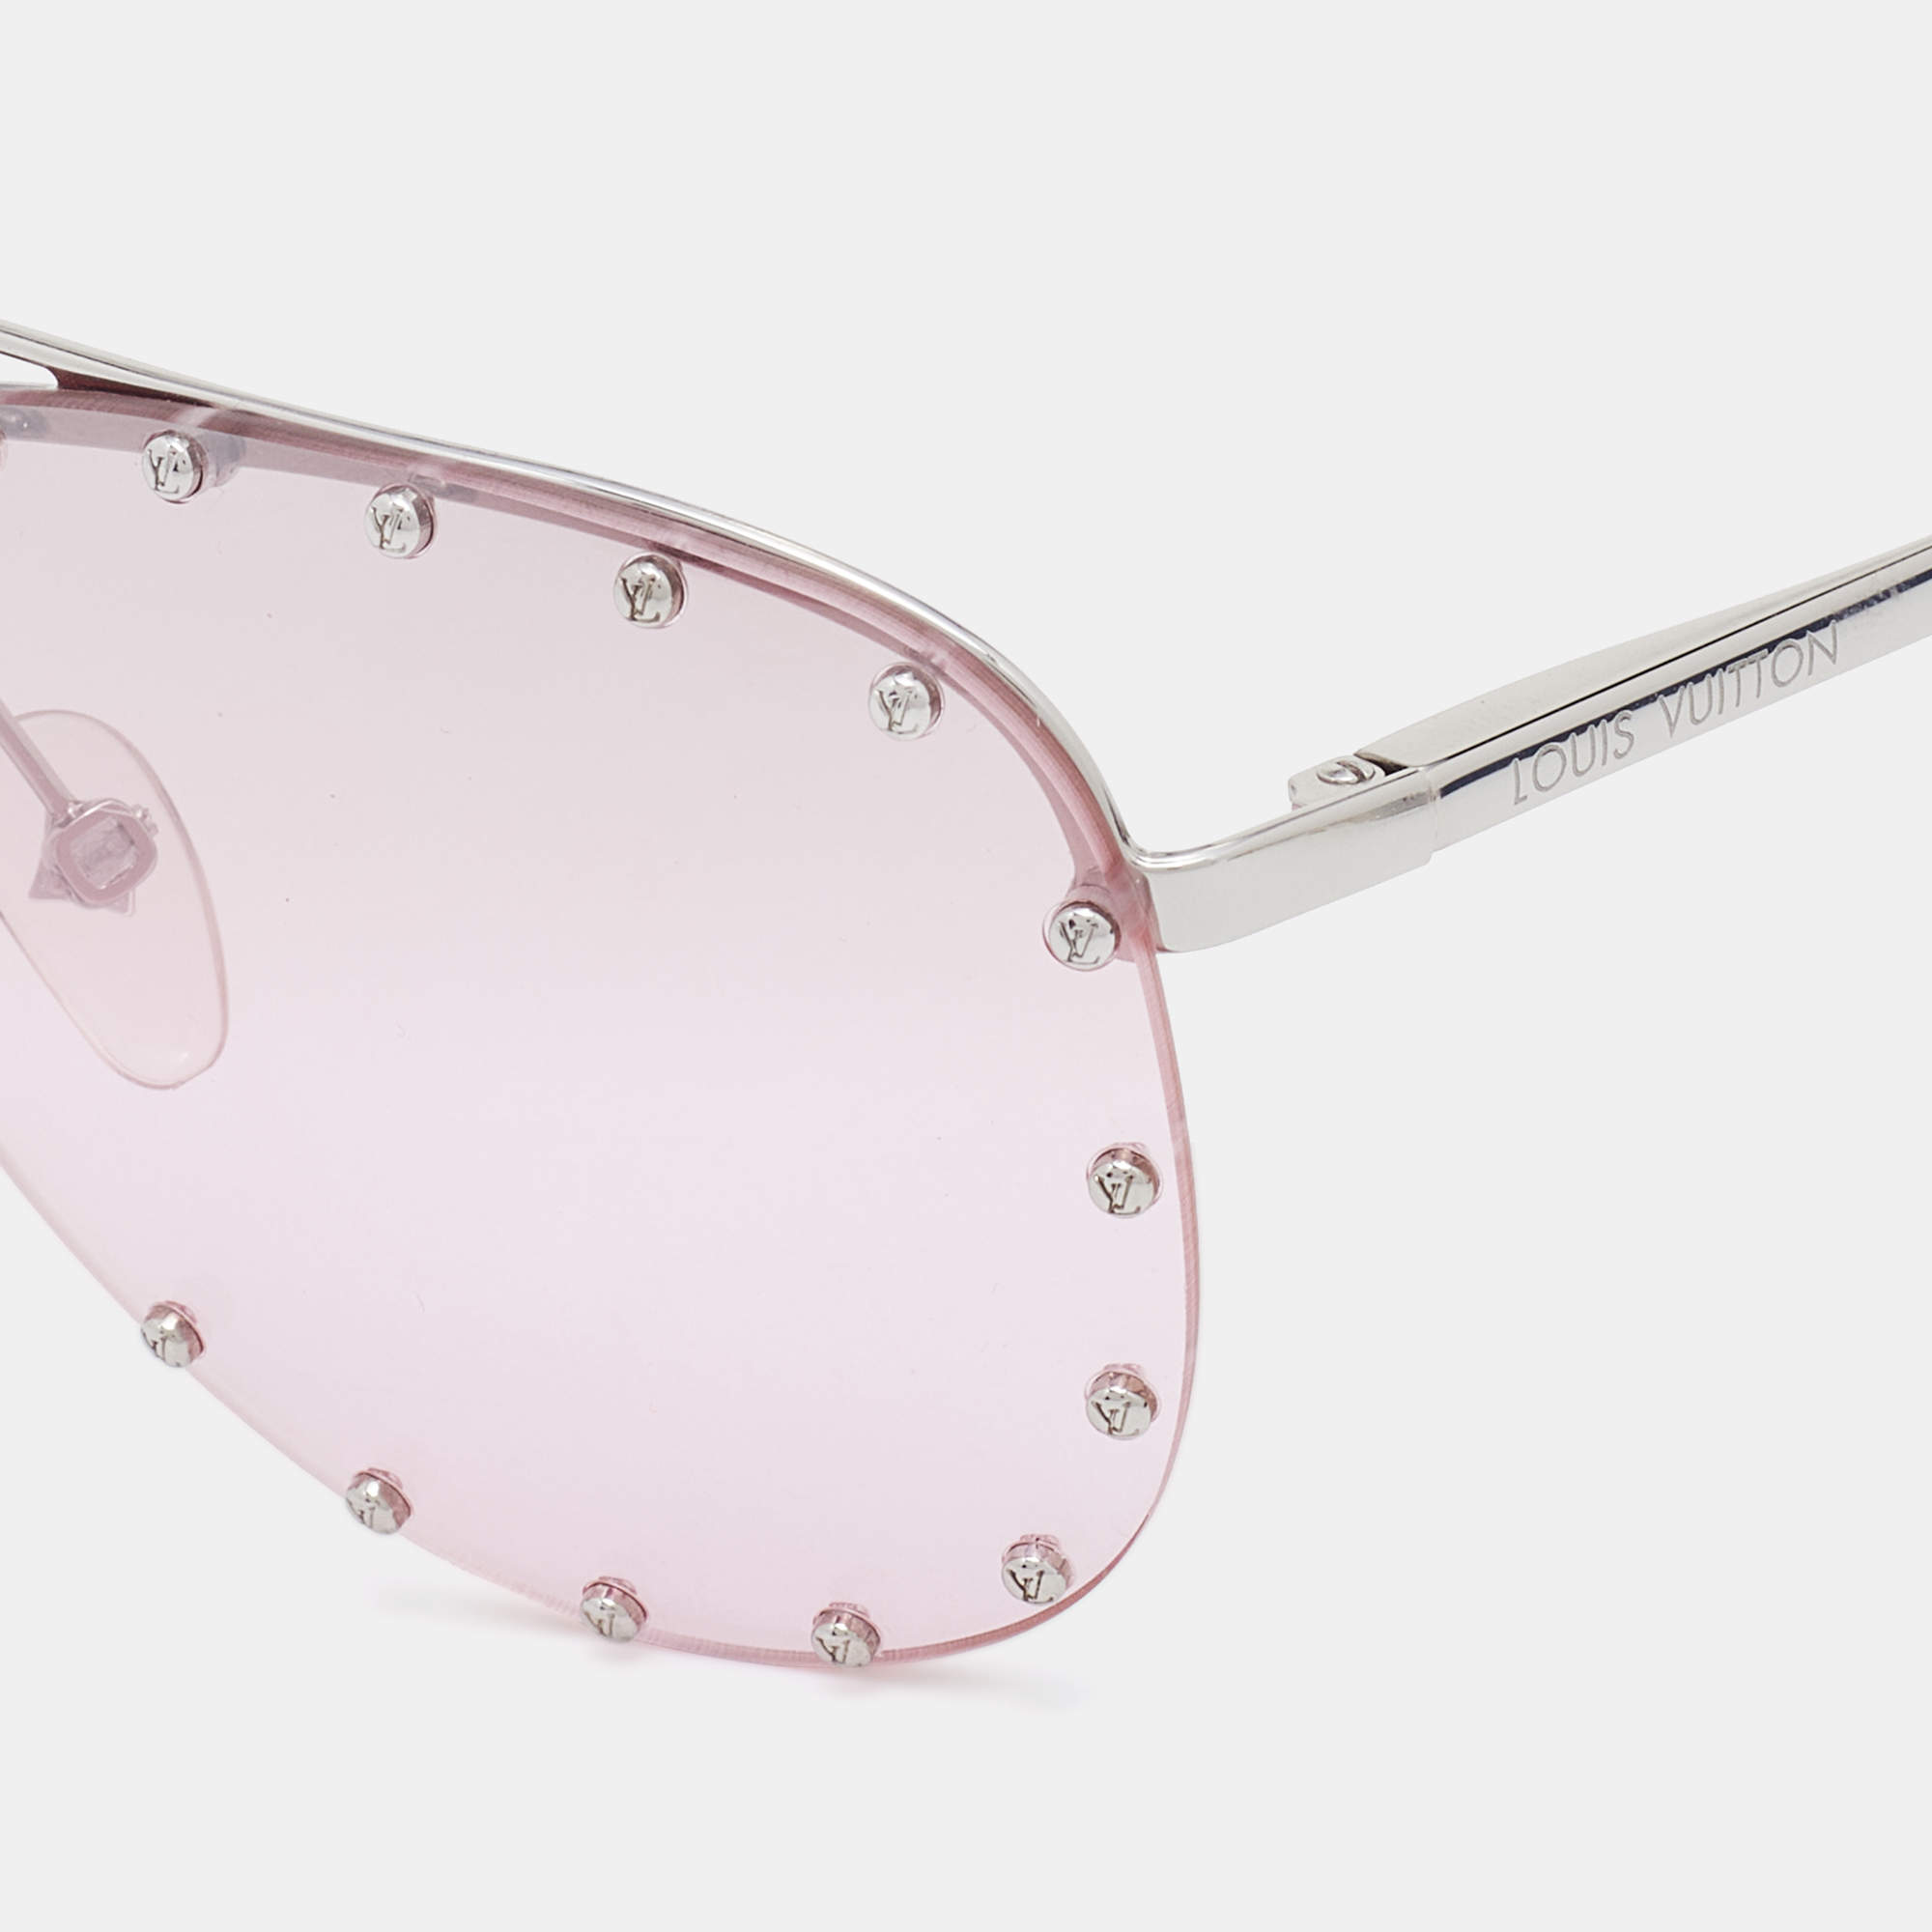 Louis Vuitton The Party Aviator Sunglasses Studded Metal Pink 1026314